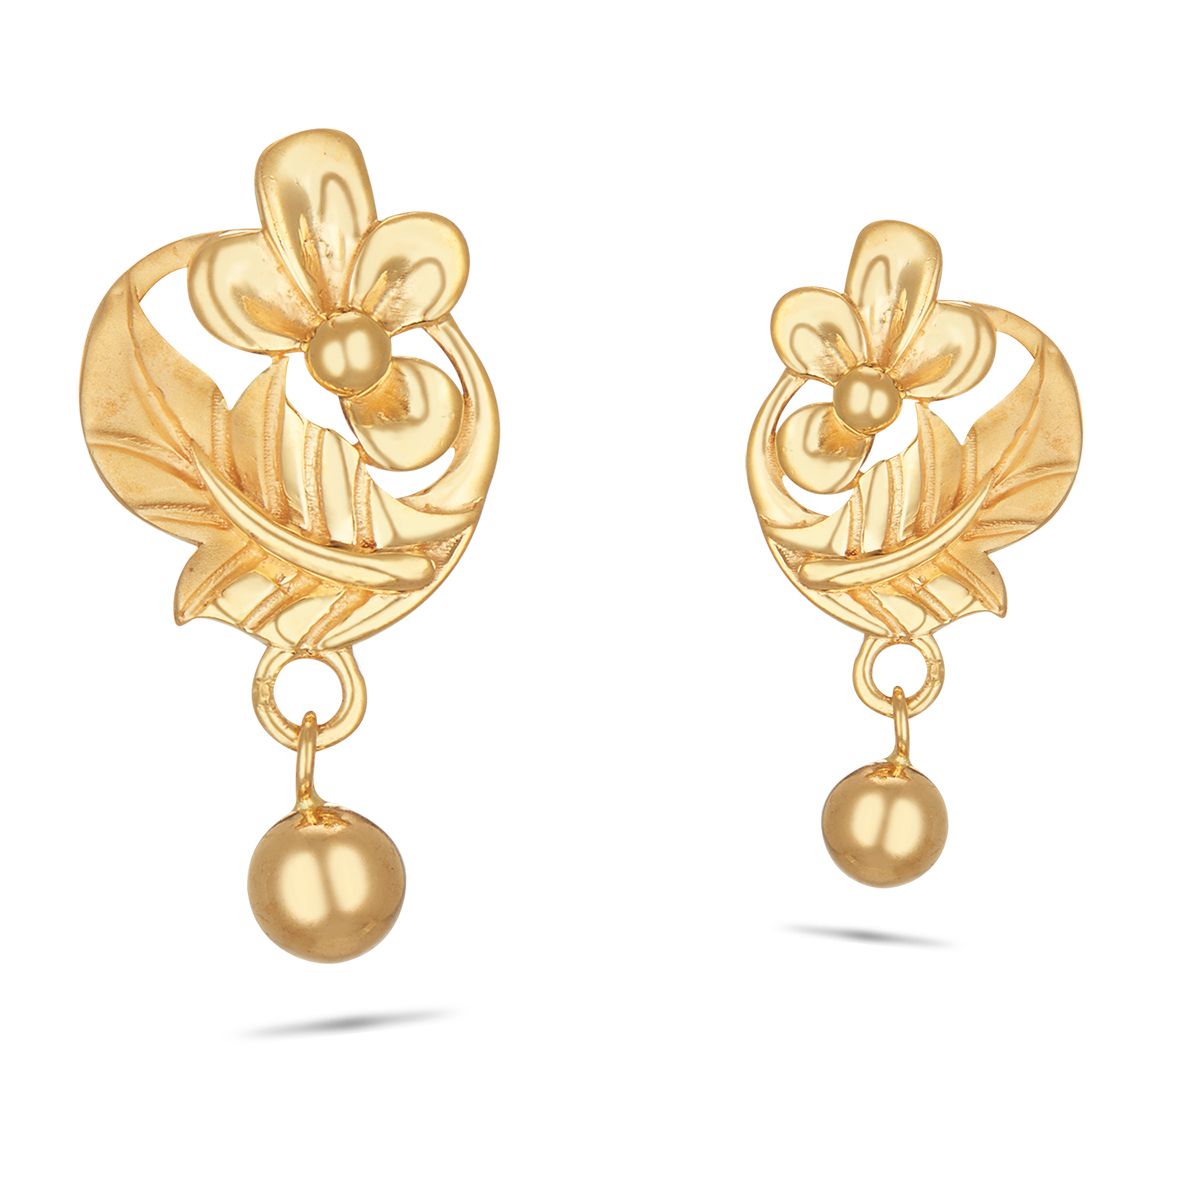 Details 116+ stylish earrings images gold best